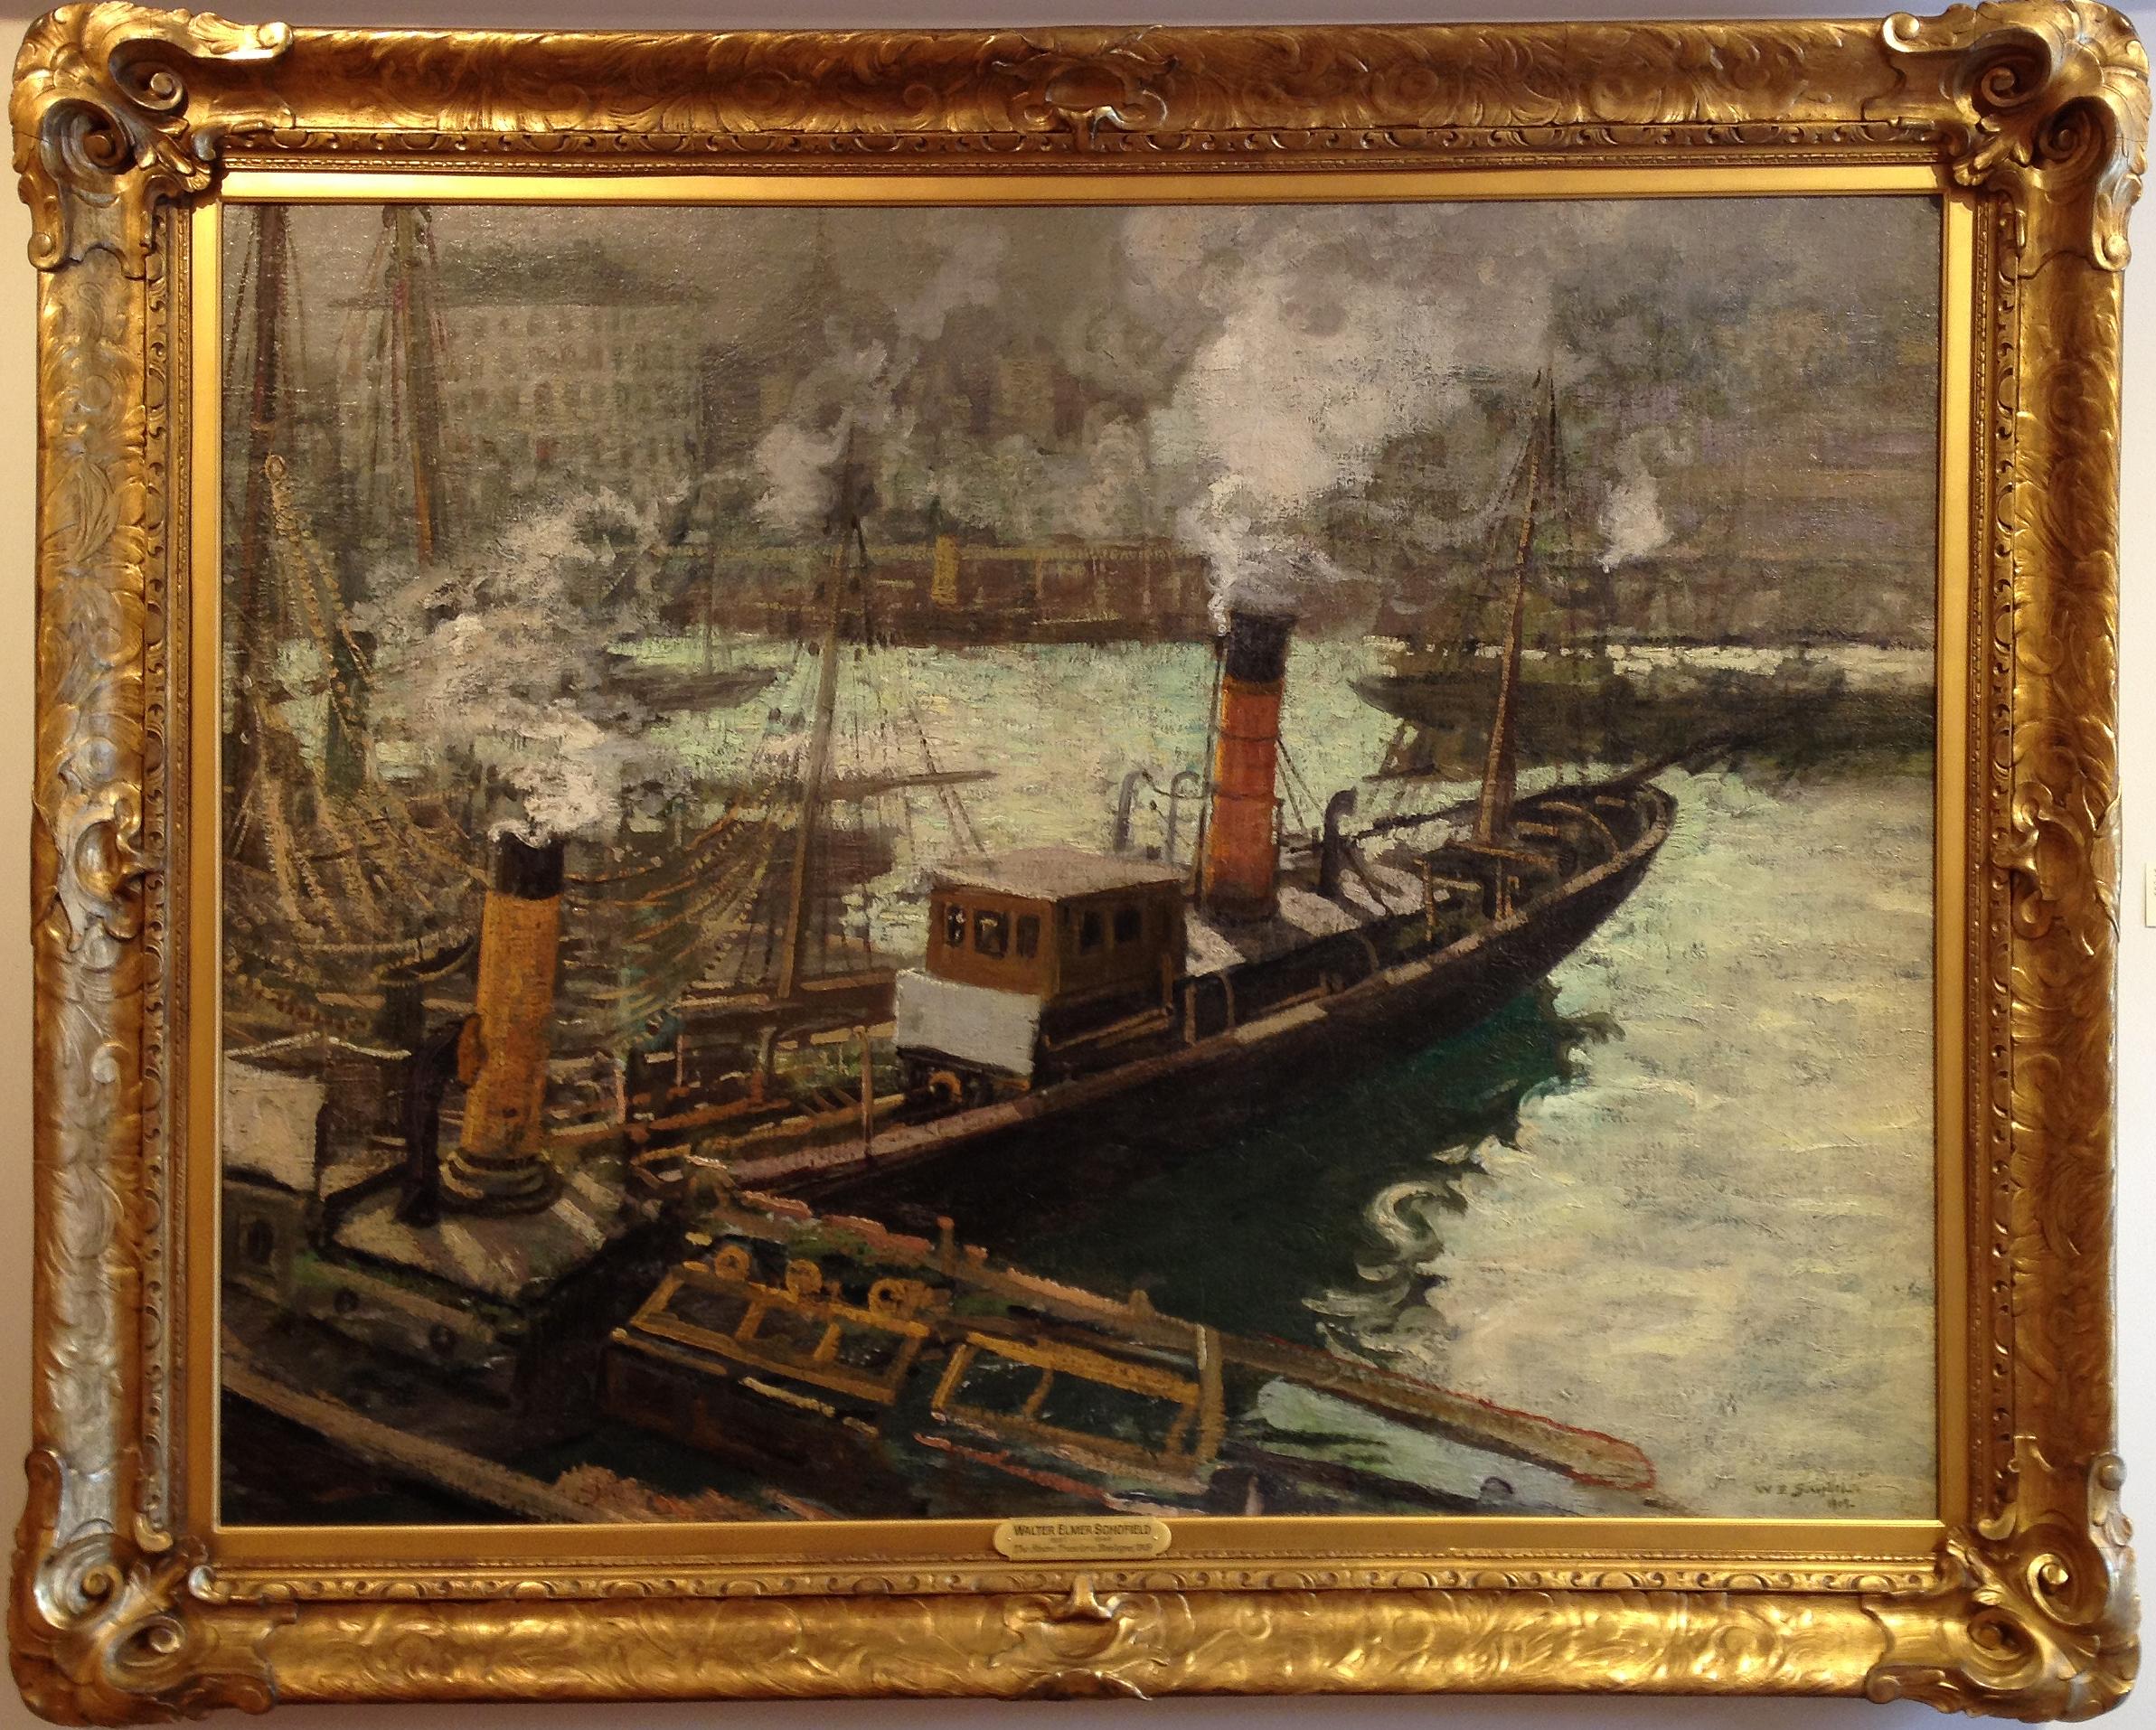 Walter Elmer Schofield Landscape Painting - "The Steam Trawlers, Boulogne"